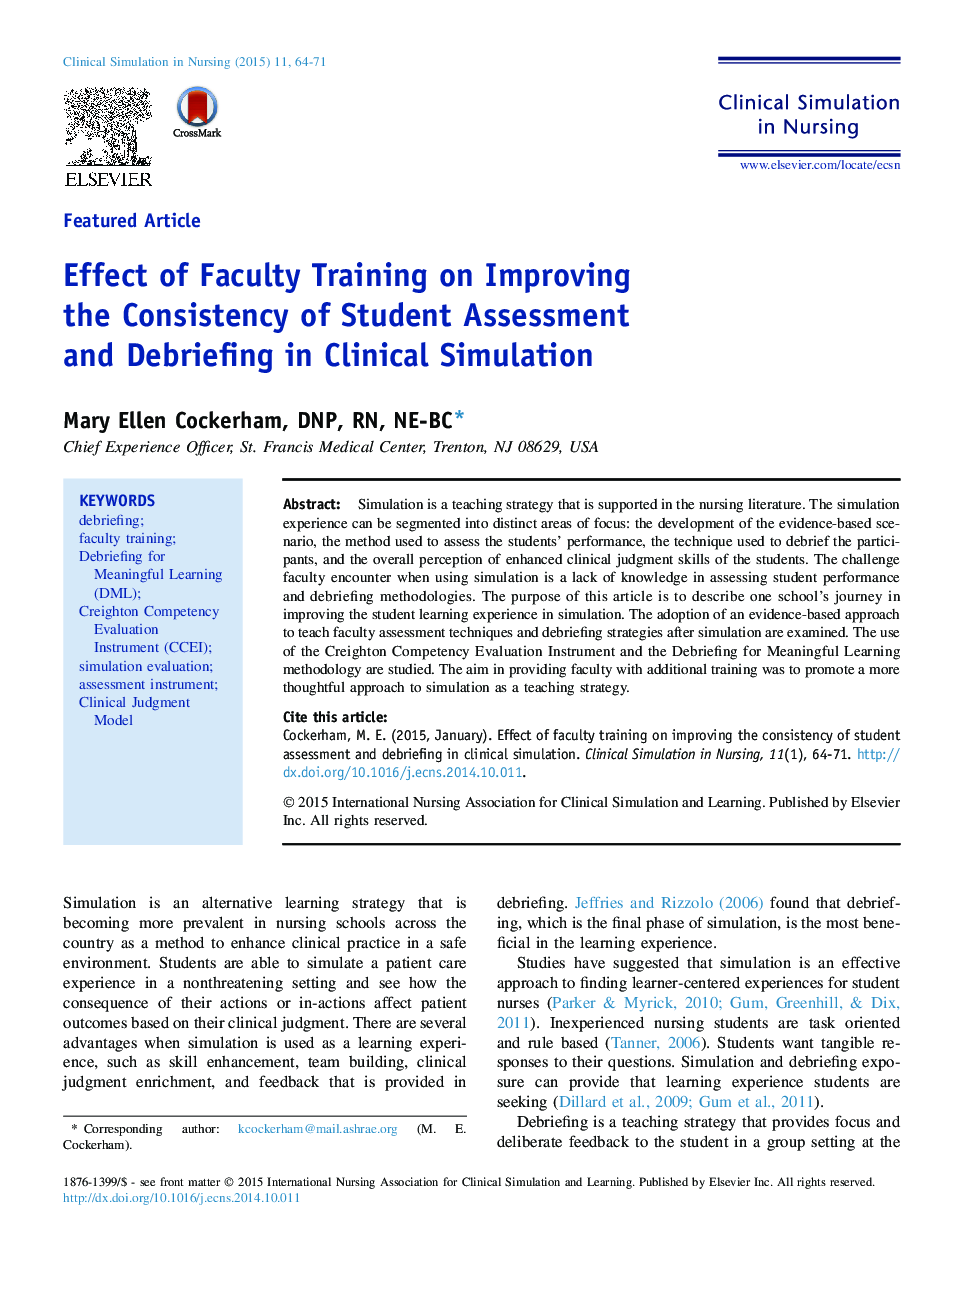 Effect of Faculty Training on Improving the Consistency of Student Assessment and Debriefing in Clinical Simulation